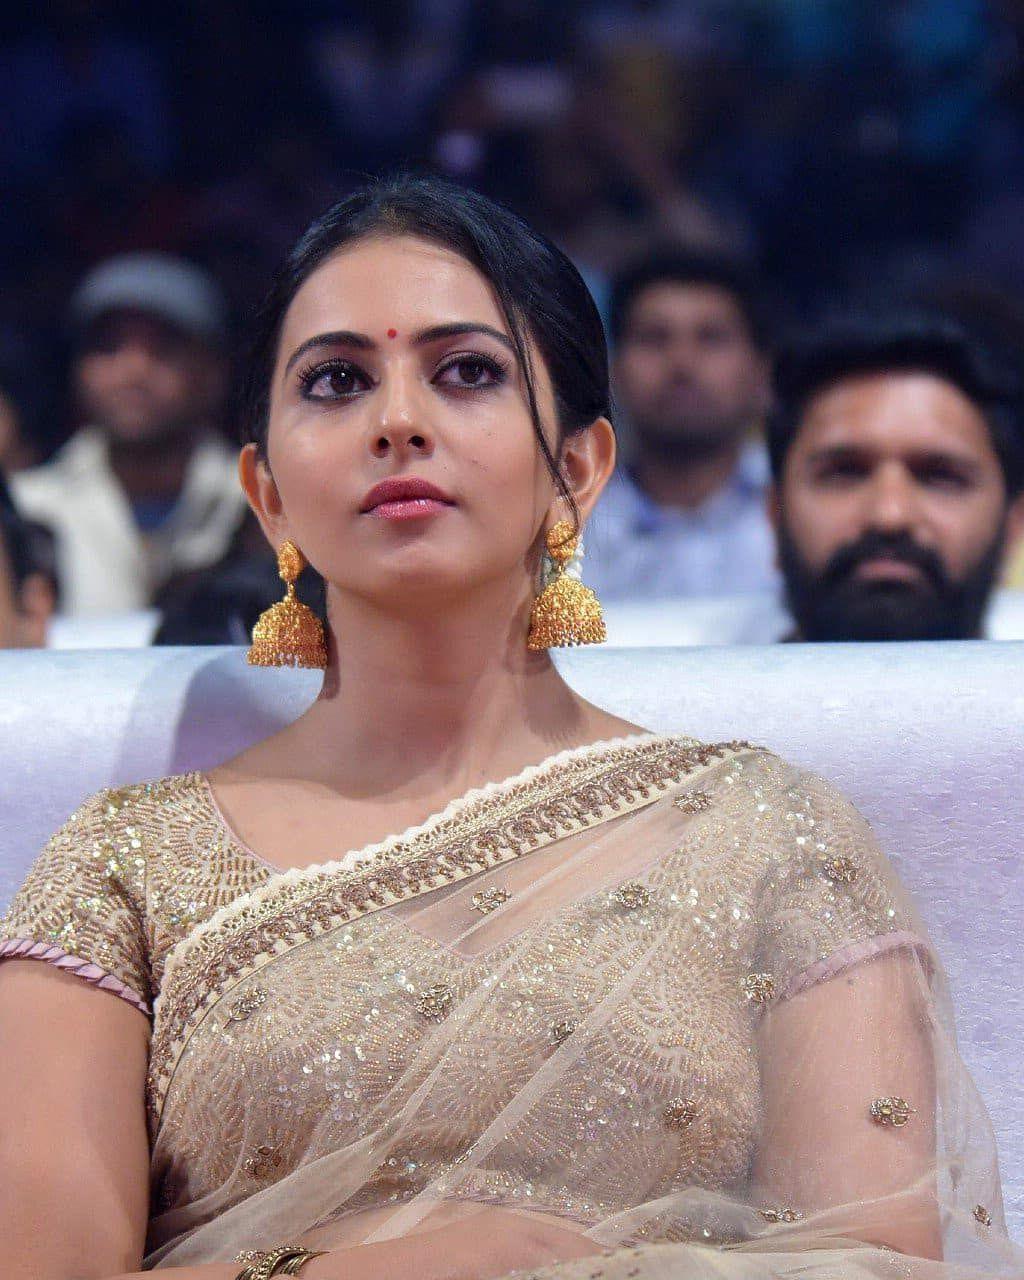 Rakul Preet spotted in Traditional attire at an event in Chennai